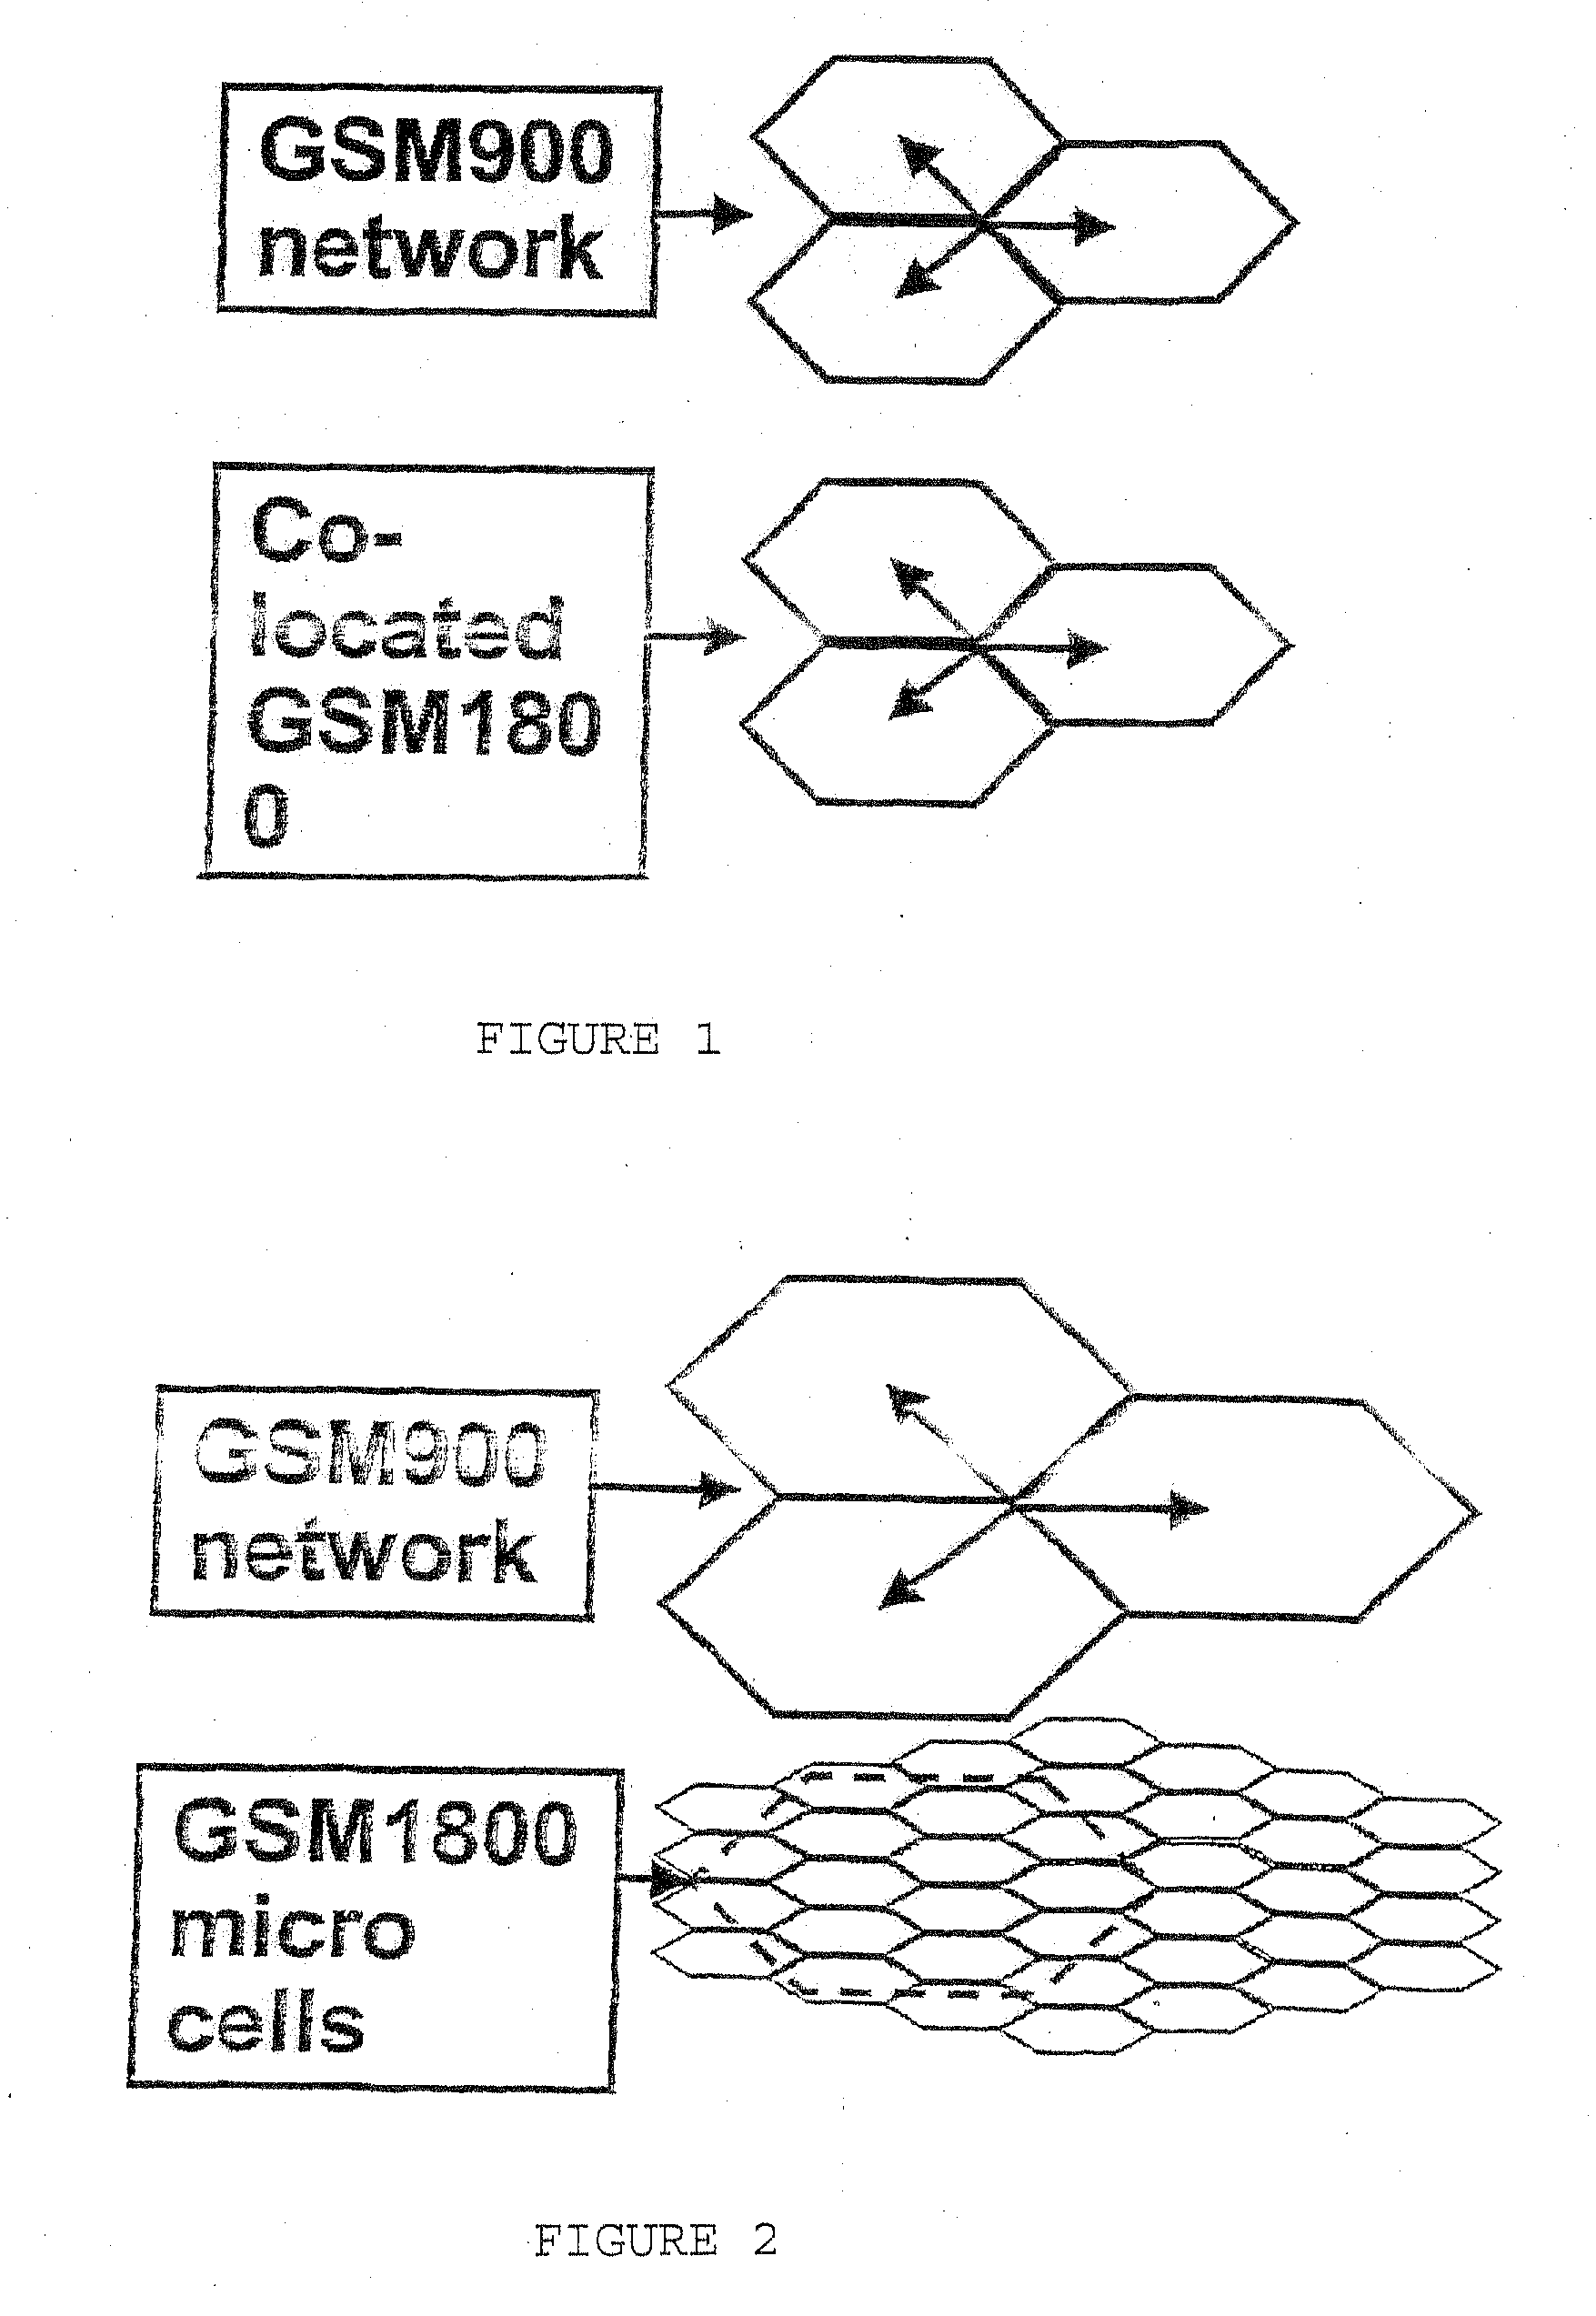 Generation of a space-related traffic database in a radio network